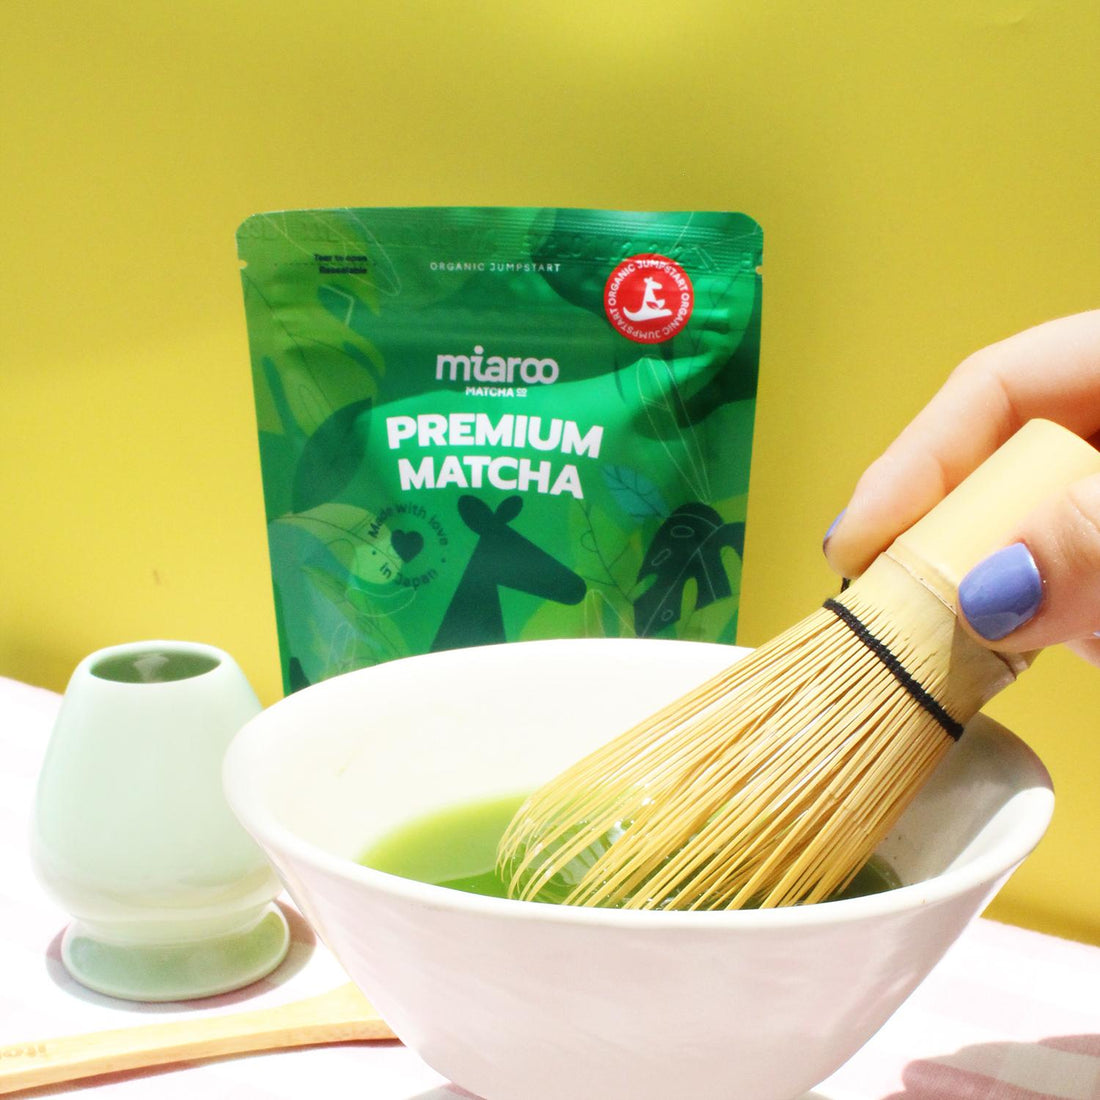 How to Make Matcha with a Whisk? (The Easy Way)